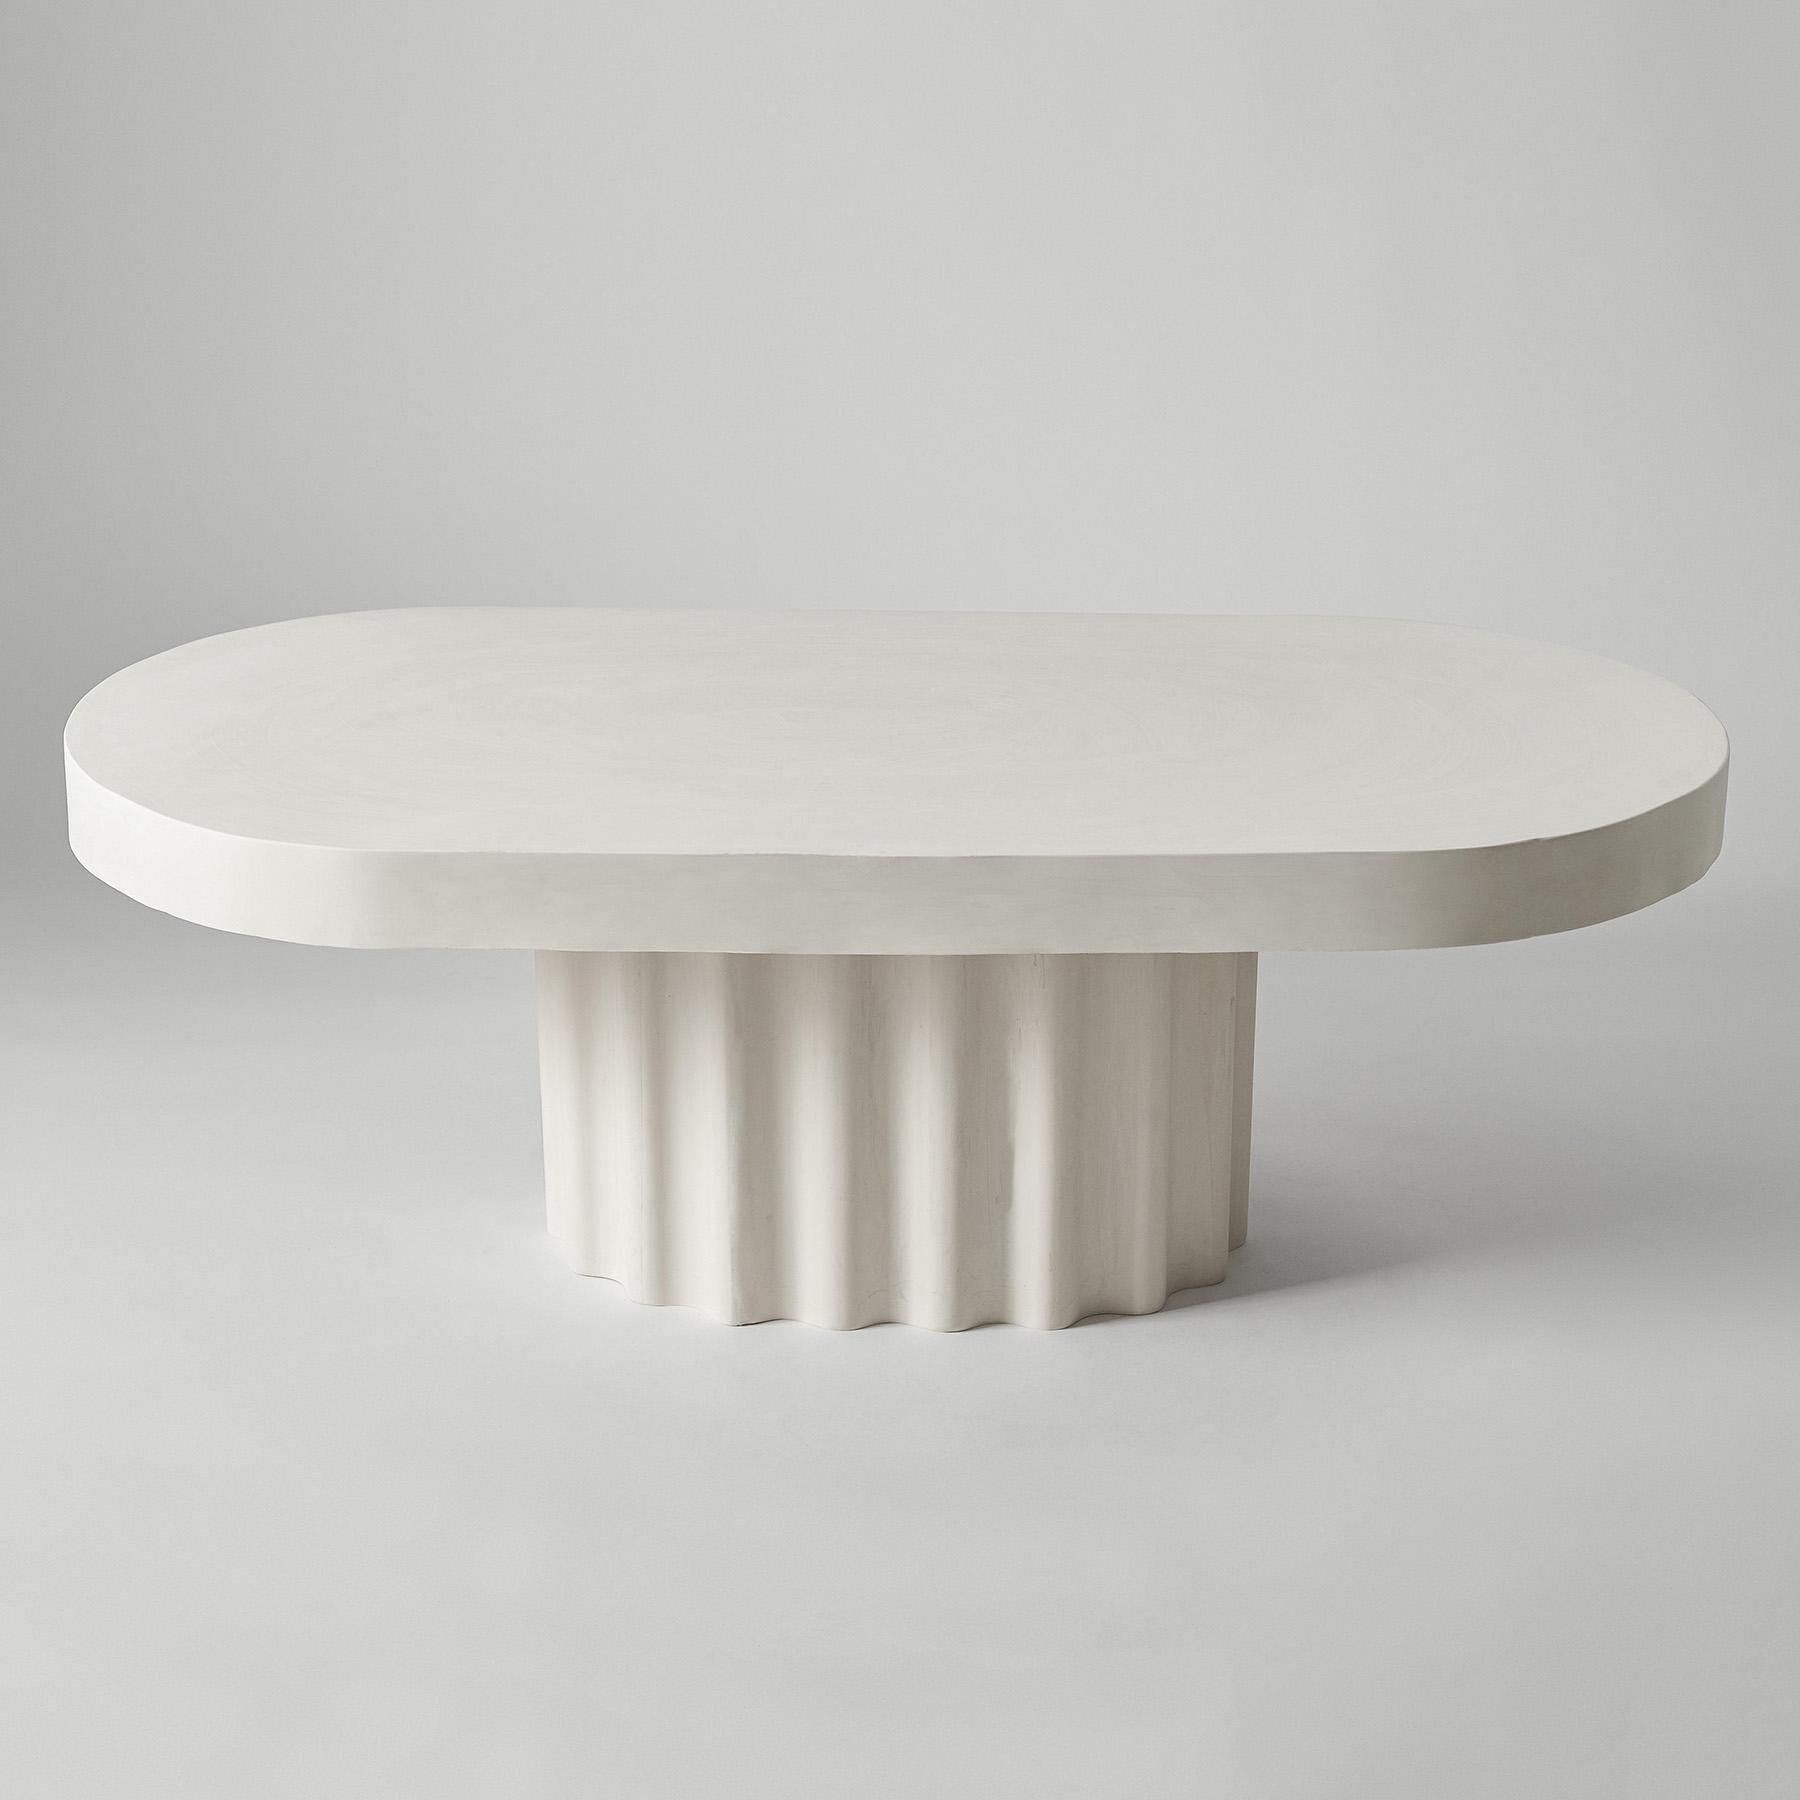 Ivory Wave Off-White Oval Coffee Table by Perler 
Dimensions: D 58 x W 120 x H 60 cm.
Materials: Jesmonite.
Weight: 45 kg.

Dimensions may vary. Please contact us.

Ivory Wave is an oval coffee table resting on an elliptical, wavy leg. Measuring